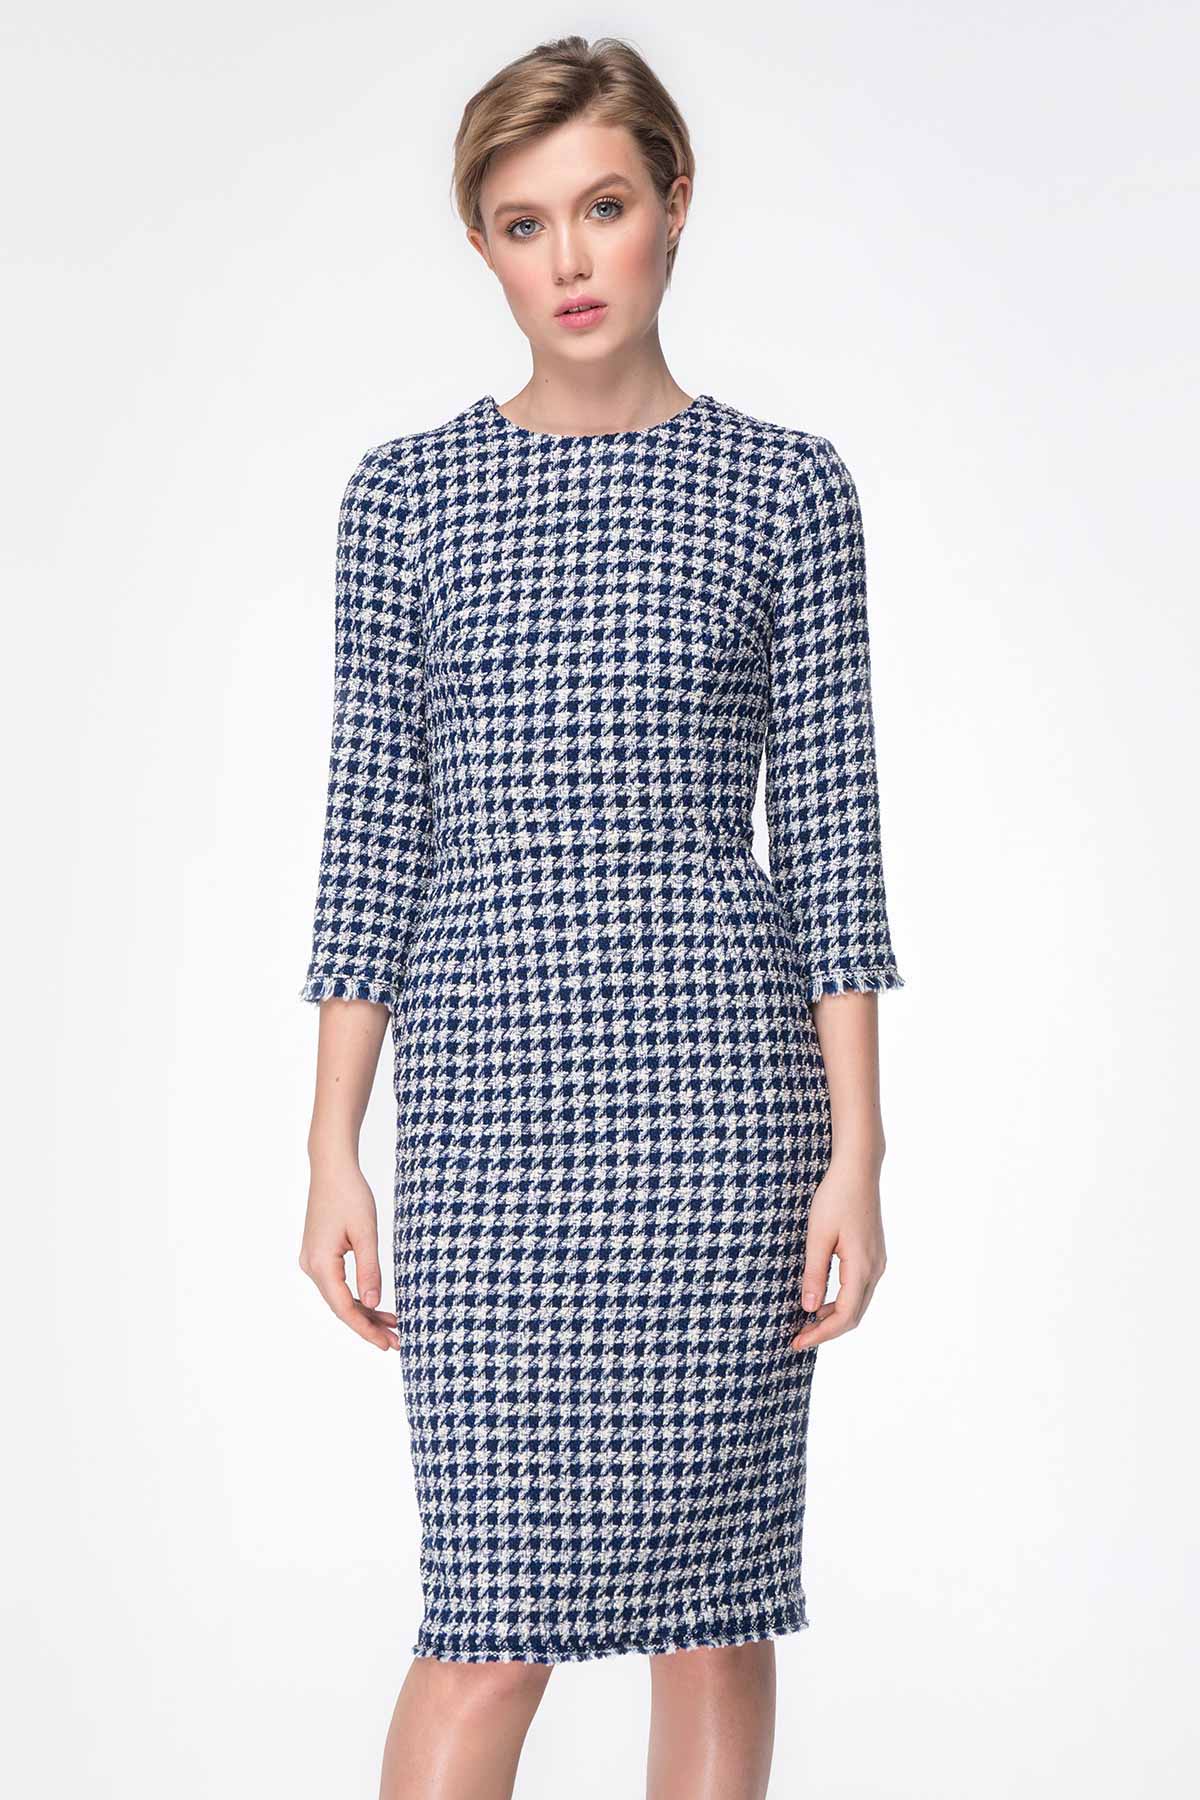 Column dress with blue&white houndstooth print, photo 9